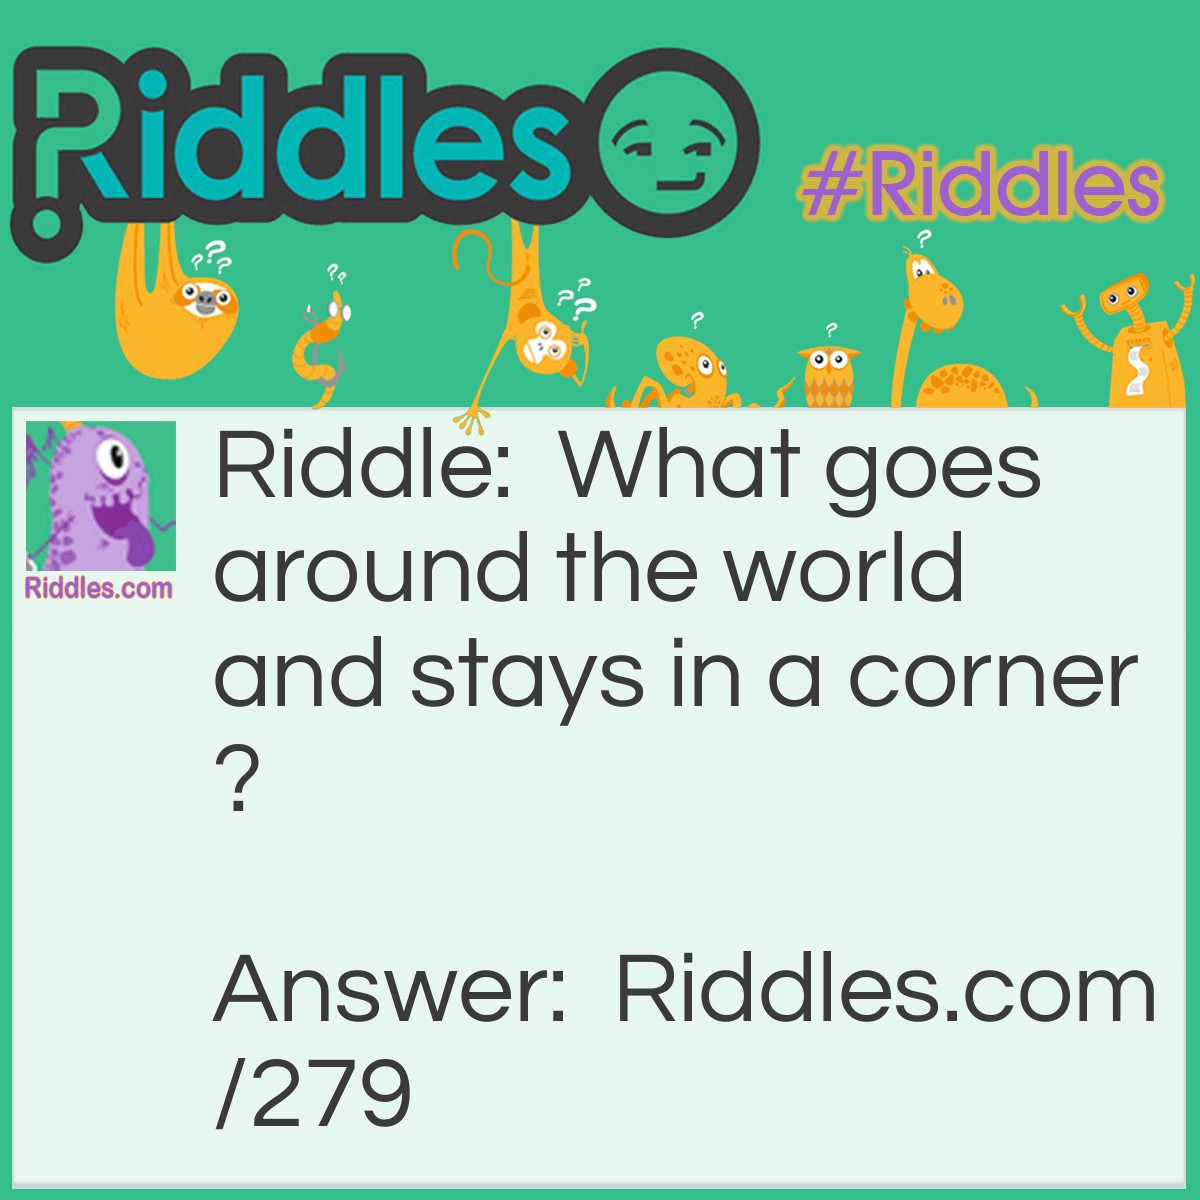 Riddle: What goes around the world and stays in a corner? Answer: A stamp.